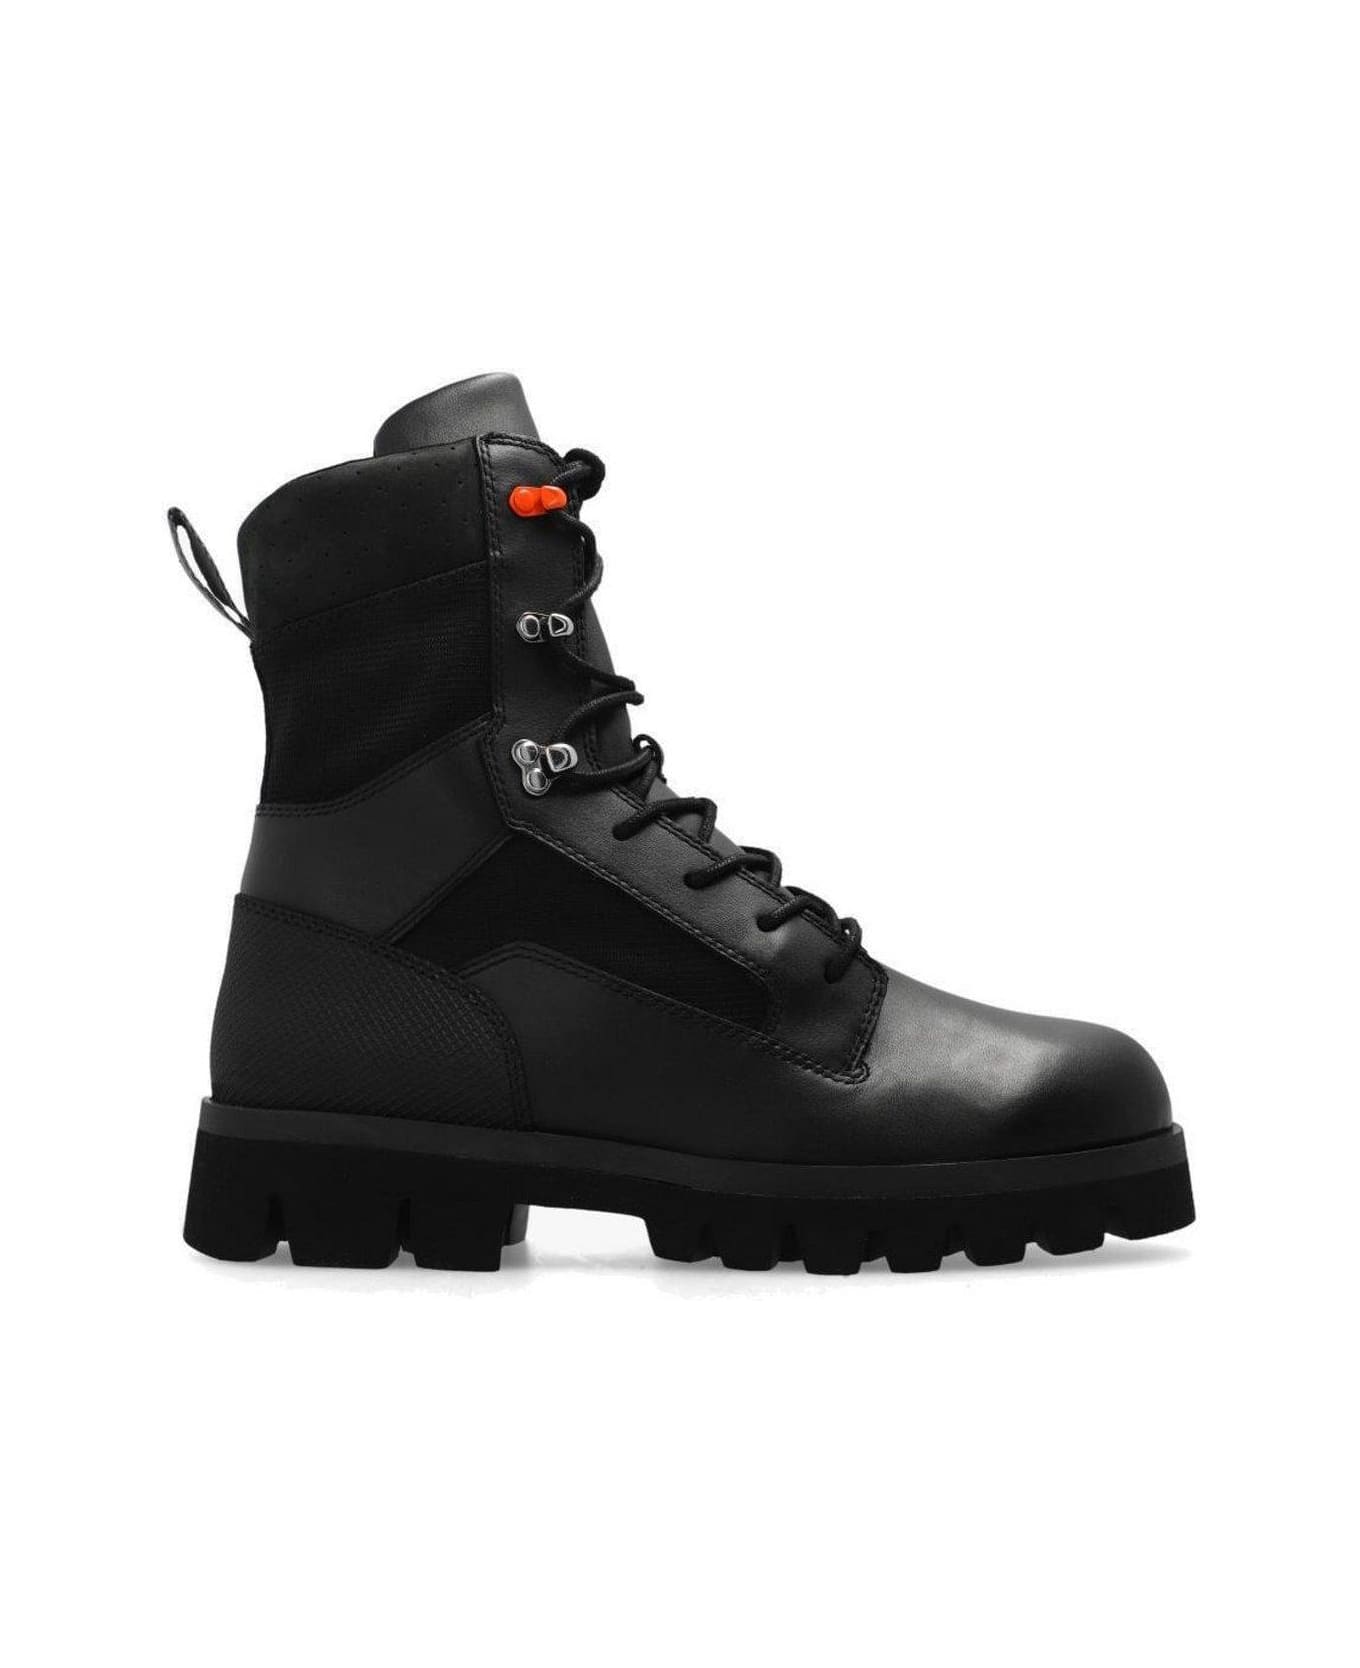 HERON PRESTON Military Lace-up Ankle Boots - Black ブーツ